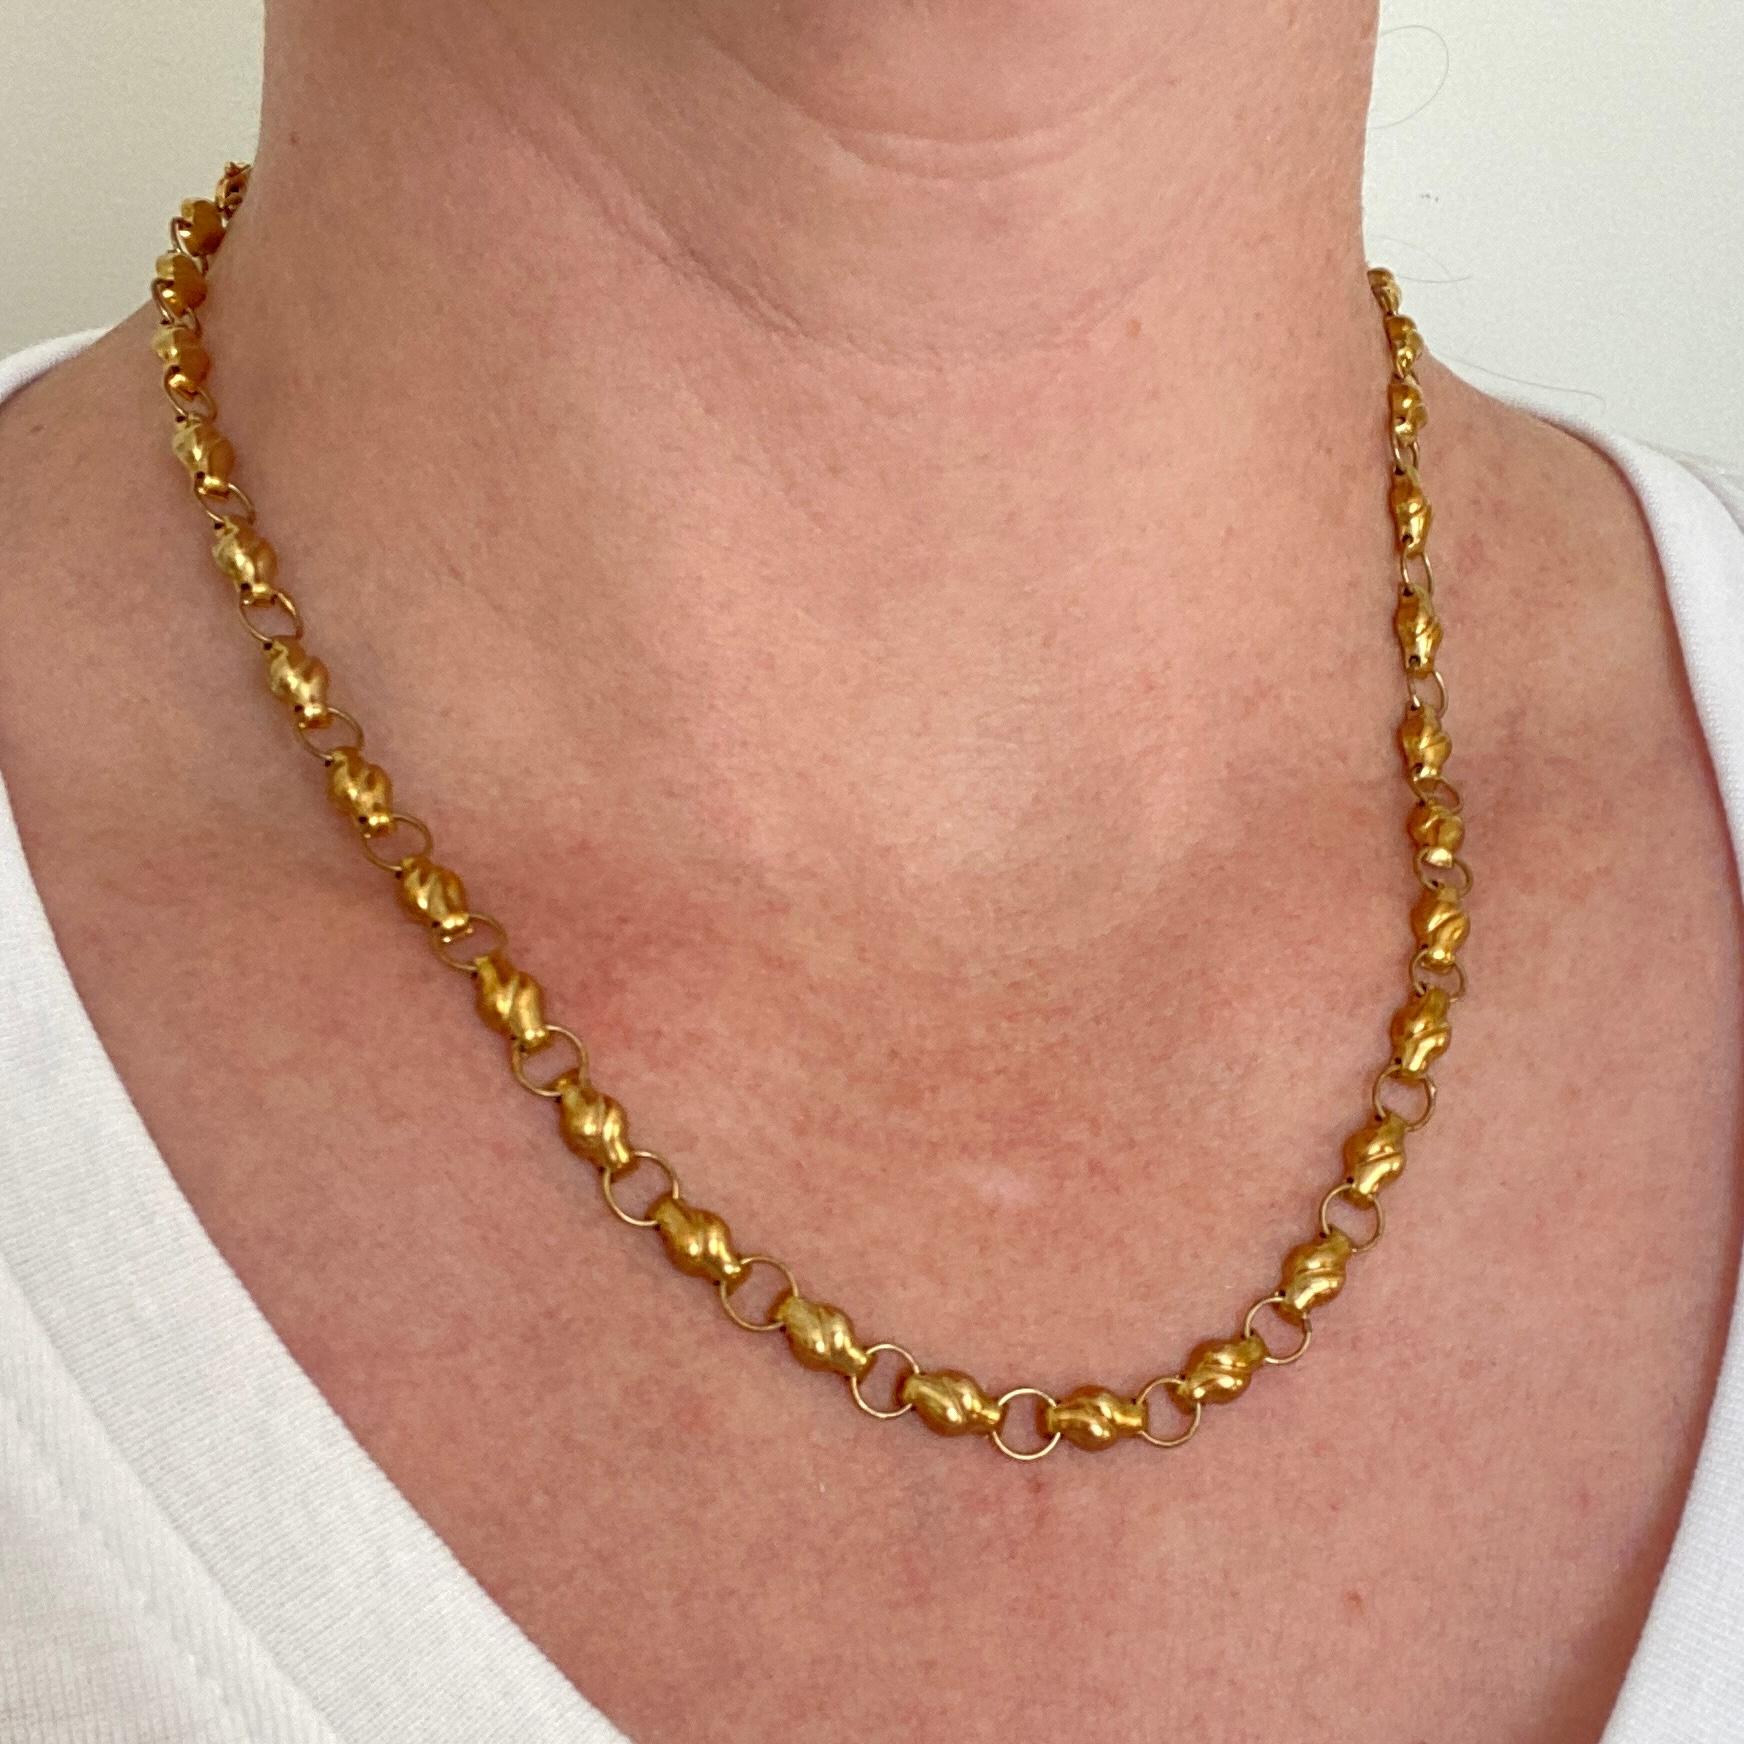 Vintage, Antique, Solid 14kt Yellow Gold Chain Link Necklace 2